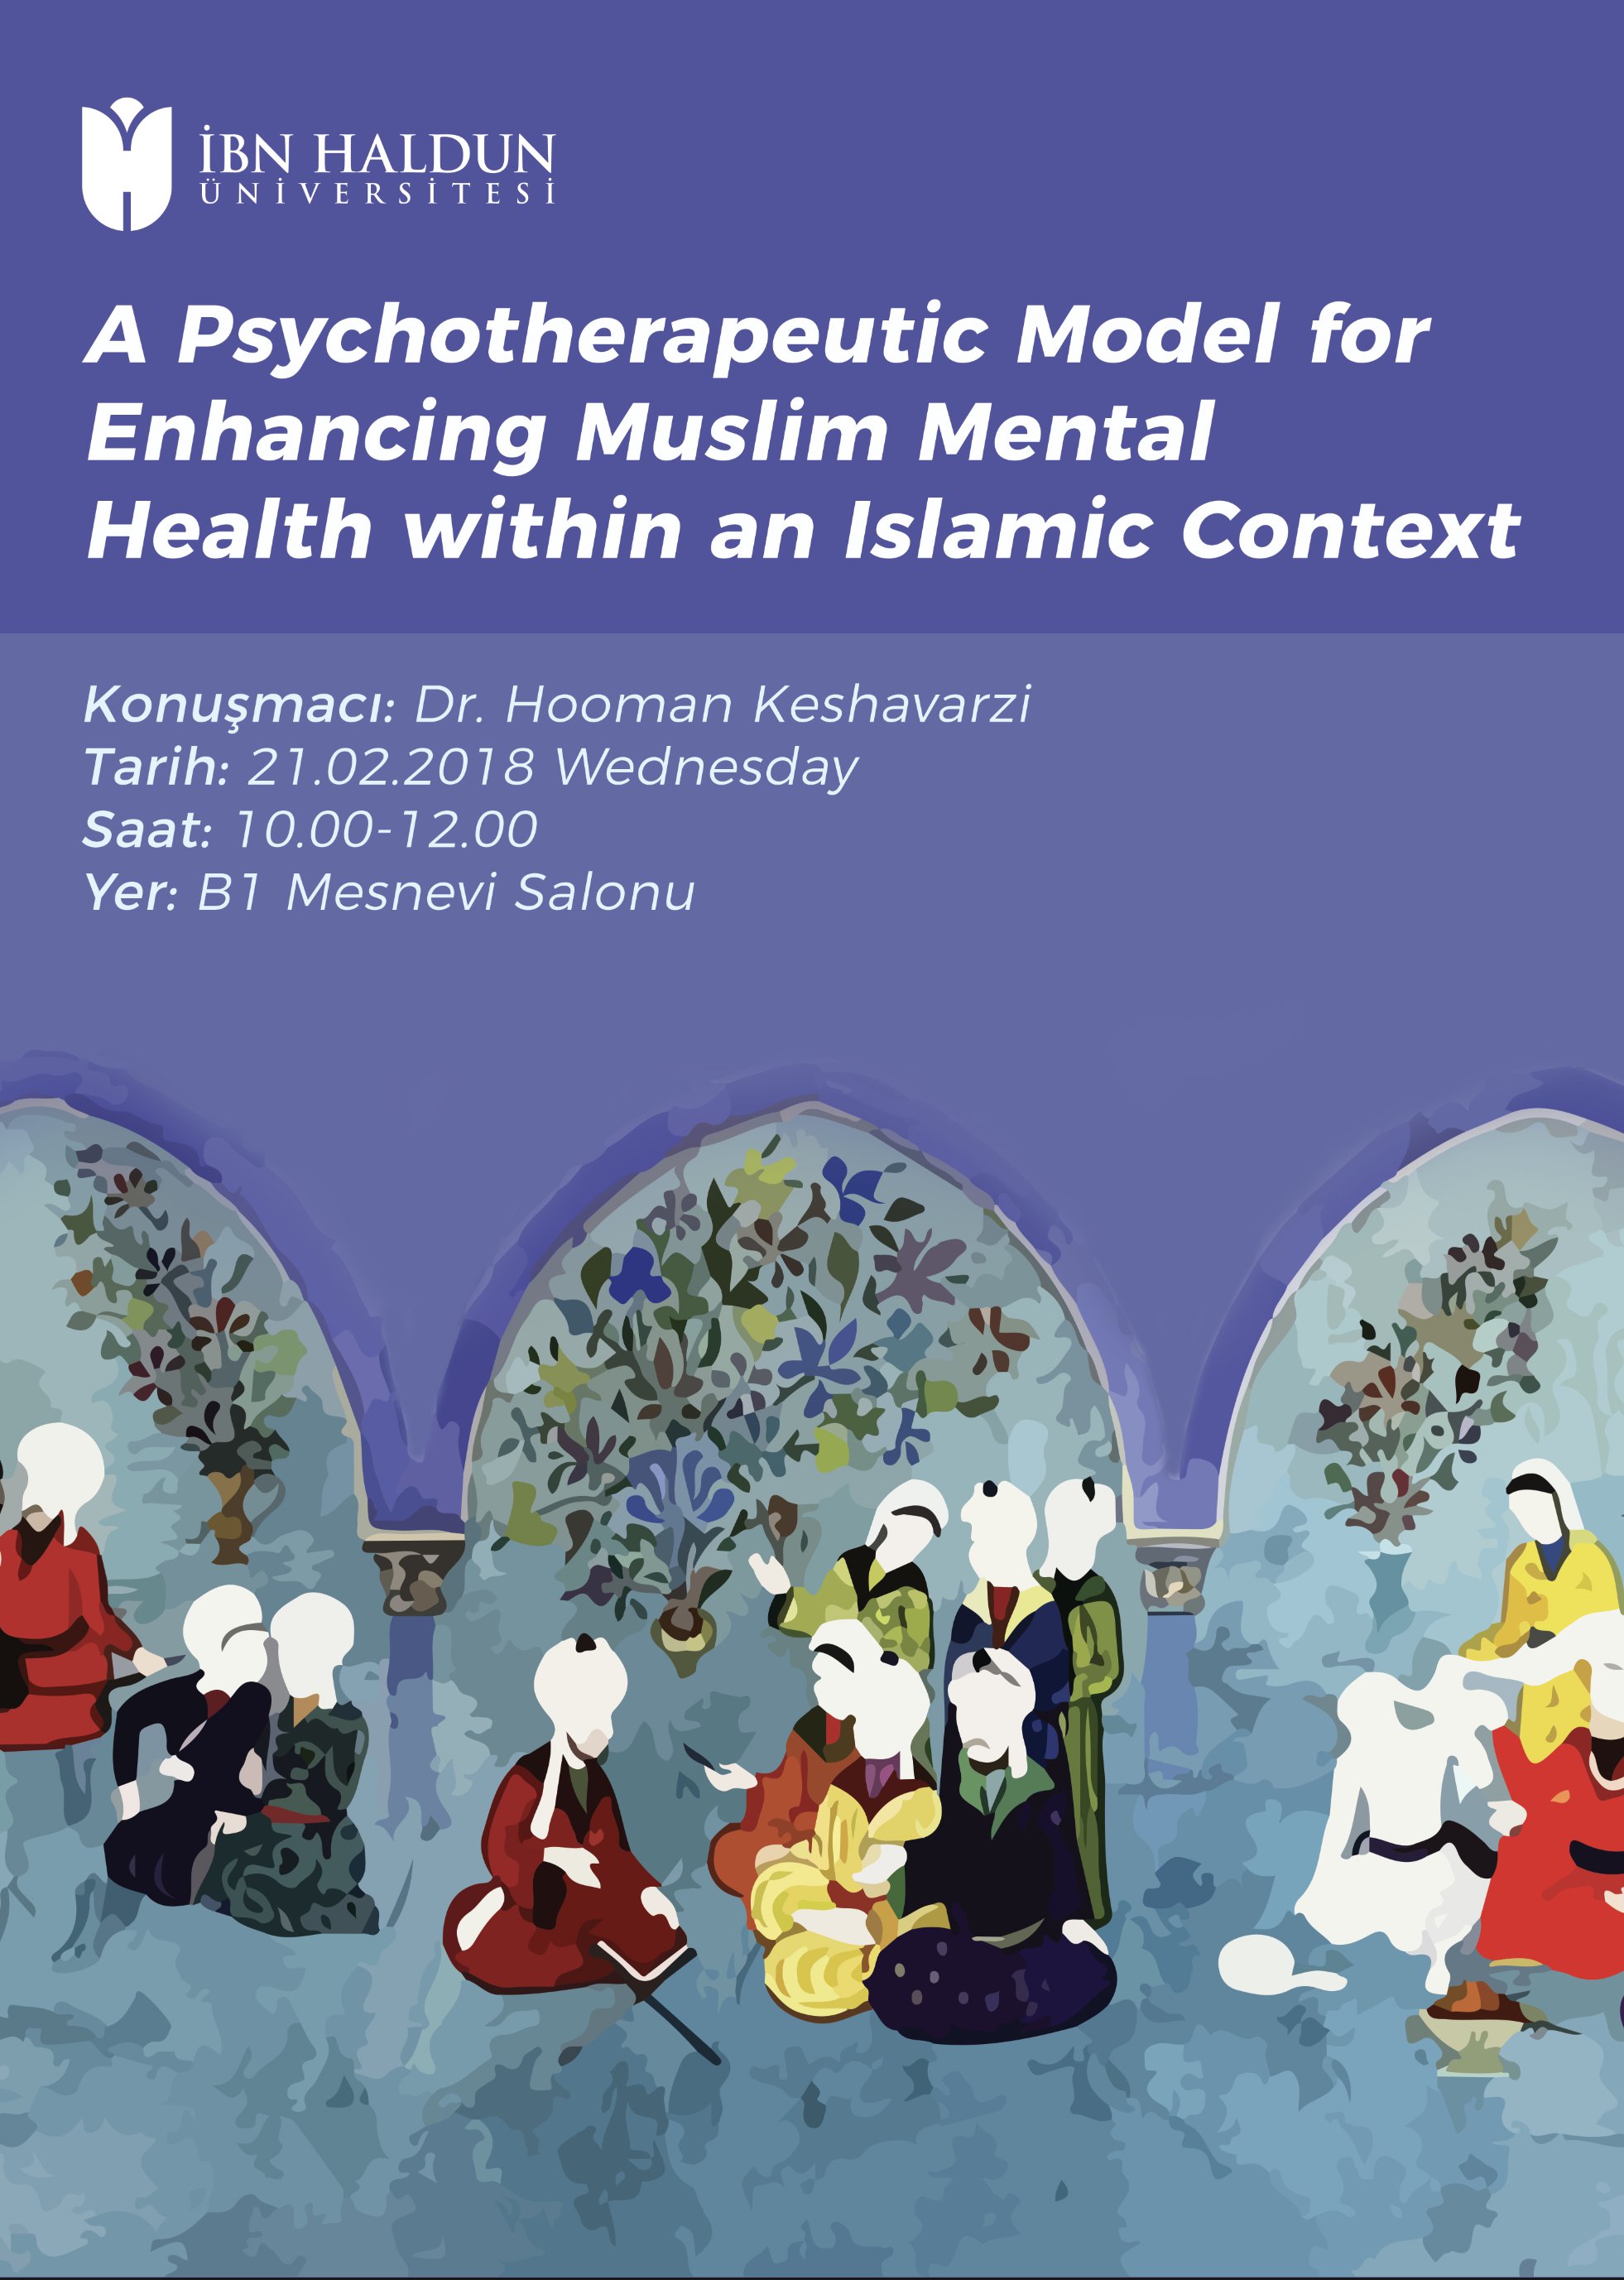 A Psychotherapuetic Model for Enhancing Muslim Mental Health within an Islamic Context